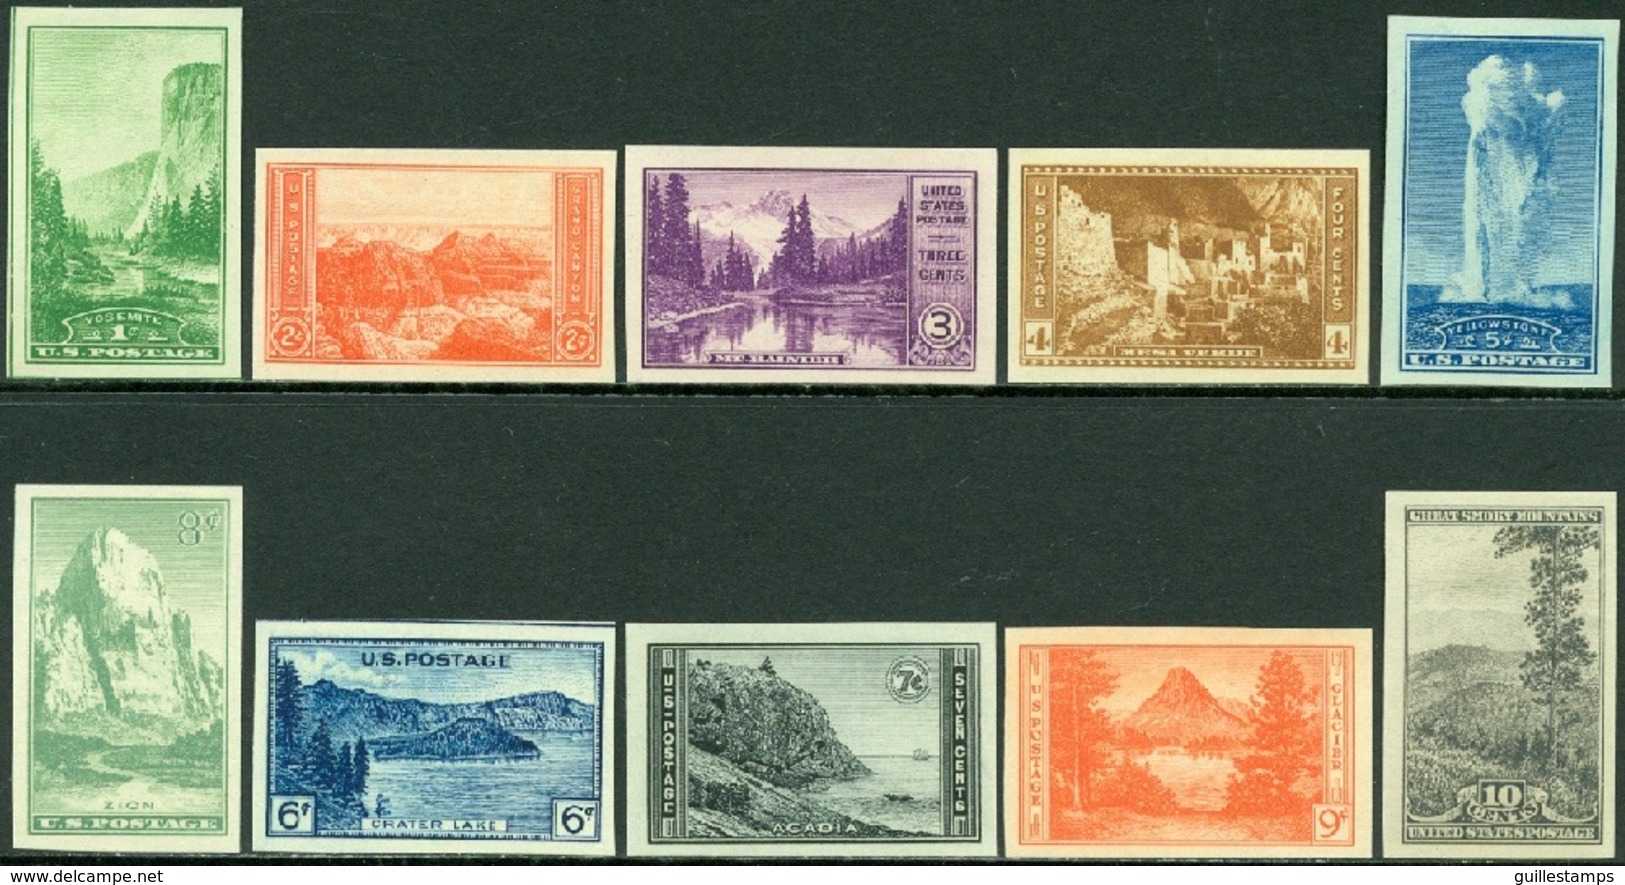 UNITED STATES OF AMERICA 1935 NATIONAL PARKS IMPERF - Unused Stamps